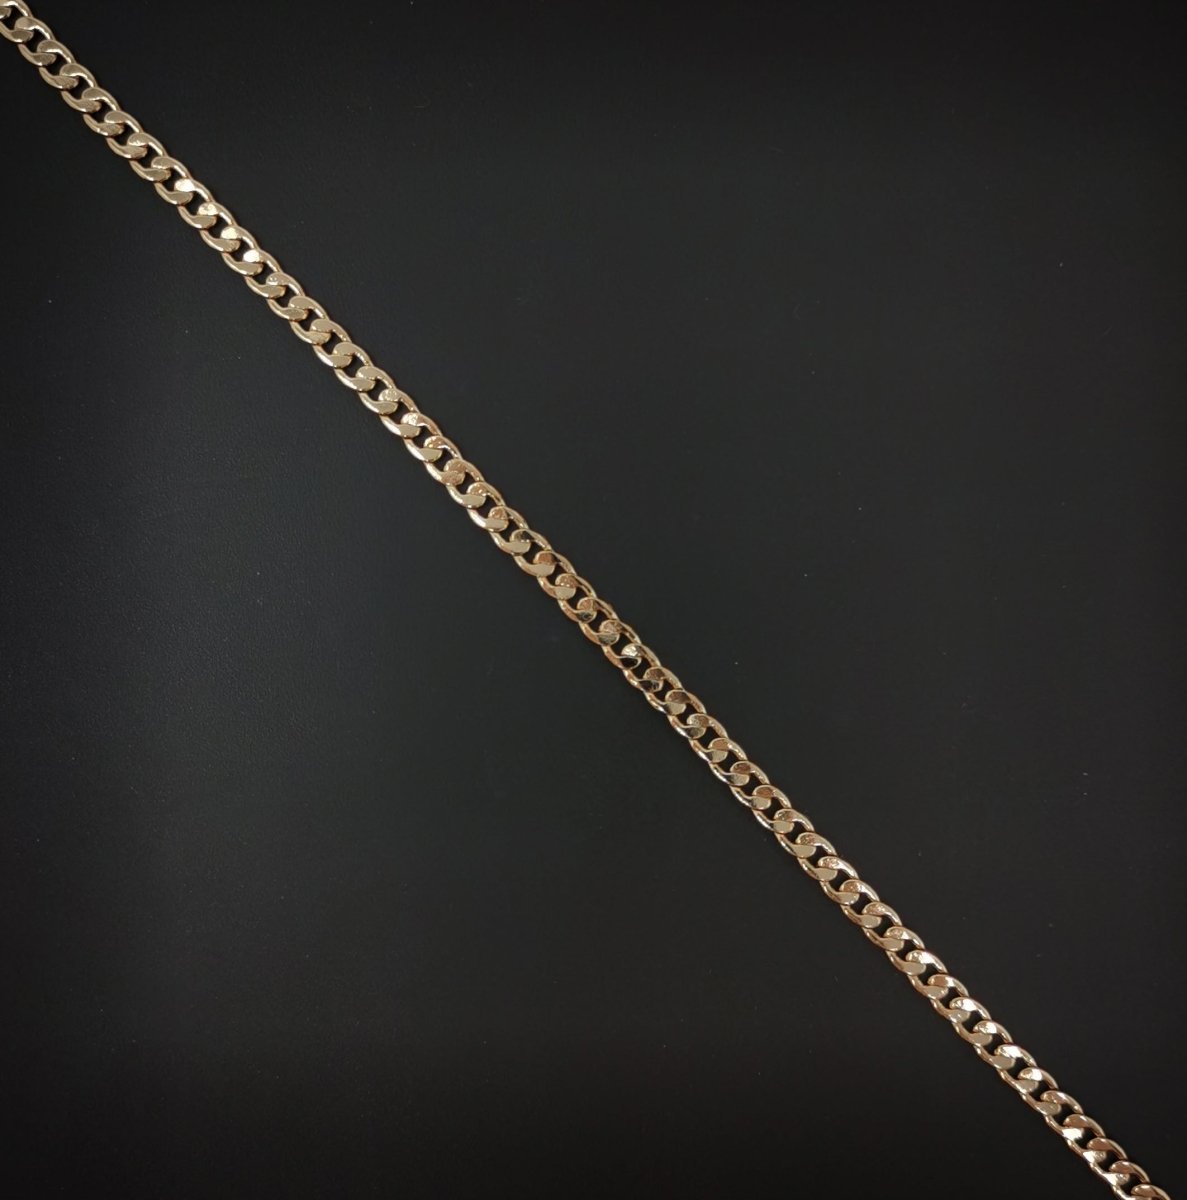 18K Gold Filled Curb Chain Necklace, 19.6 Inches Curb Finished Chain Necklace For Necklace Jewelry Making, 4mm Width Curb Necklace w/ Lobster Clasps | CN-684 Clearance Pricing - DLUXCA